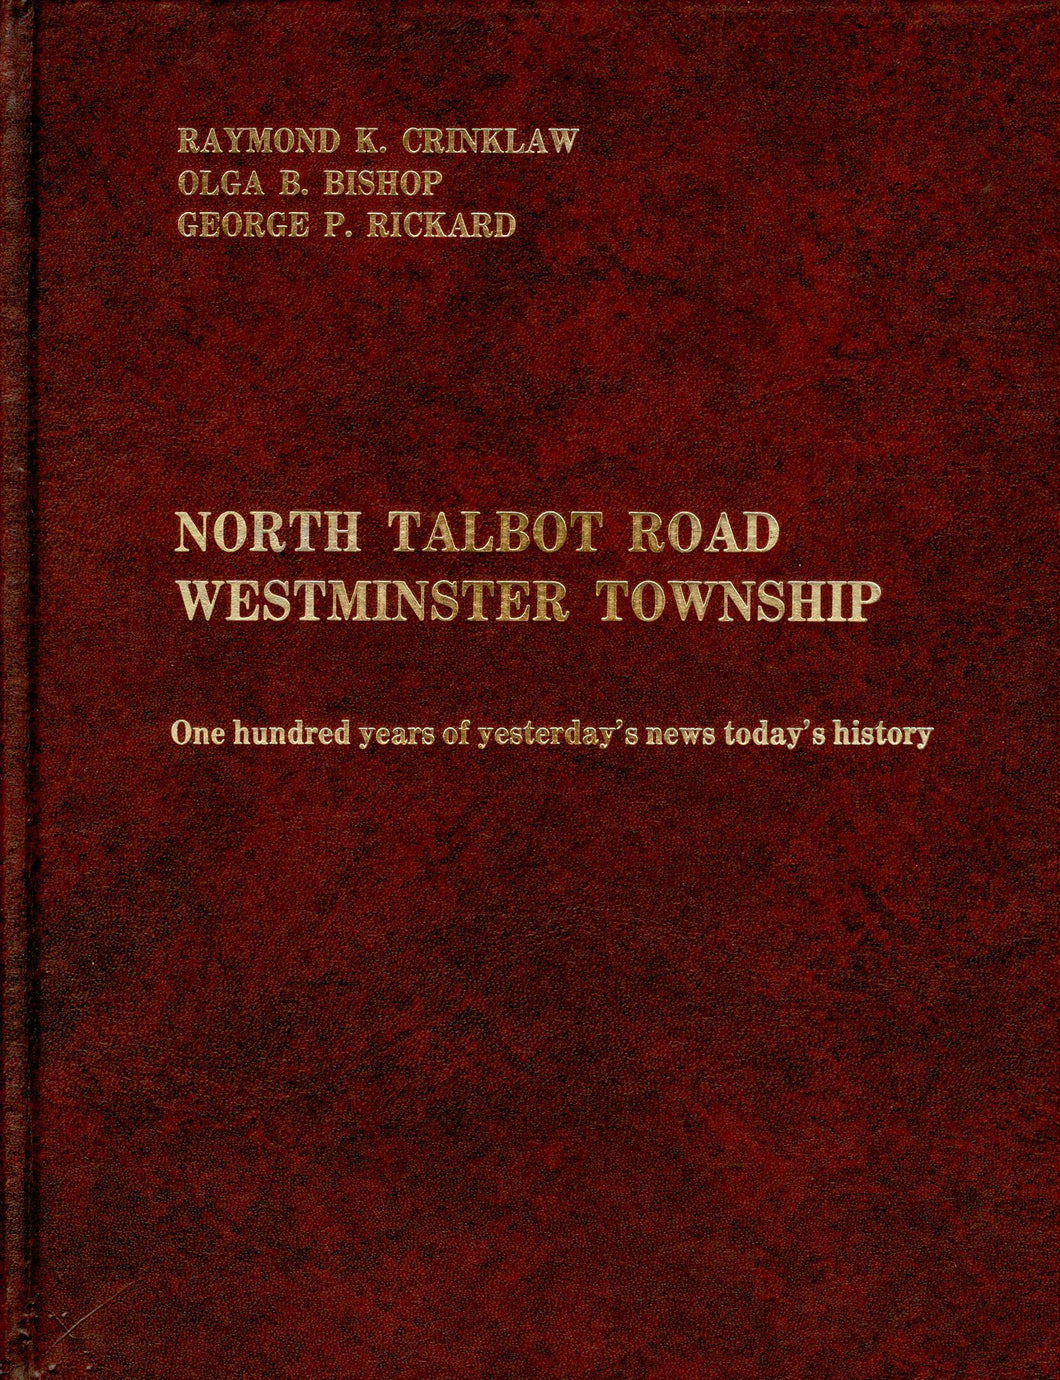 North Talbot Road, Westminster Township: One hundred years of yesterday's news, today's history